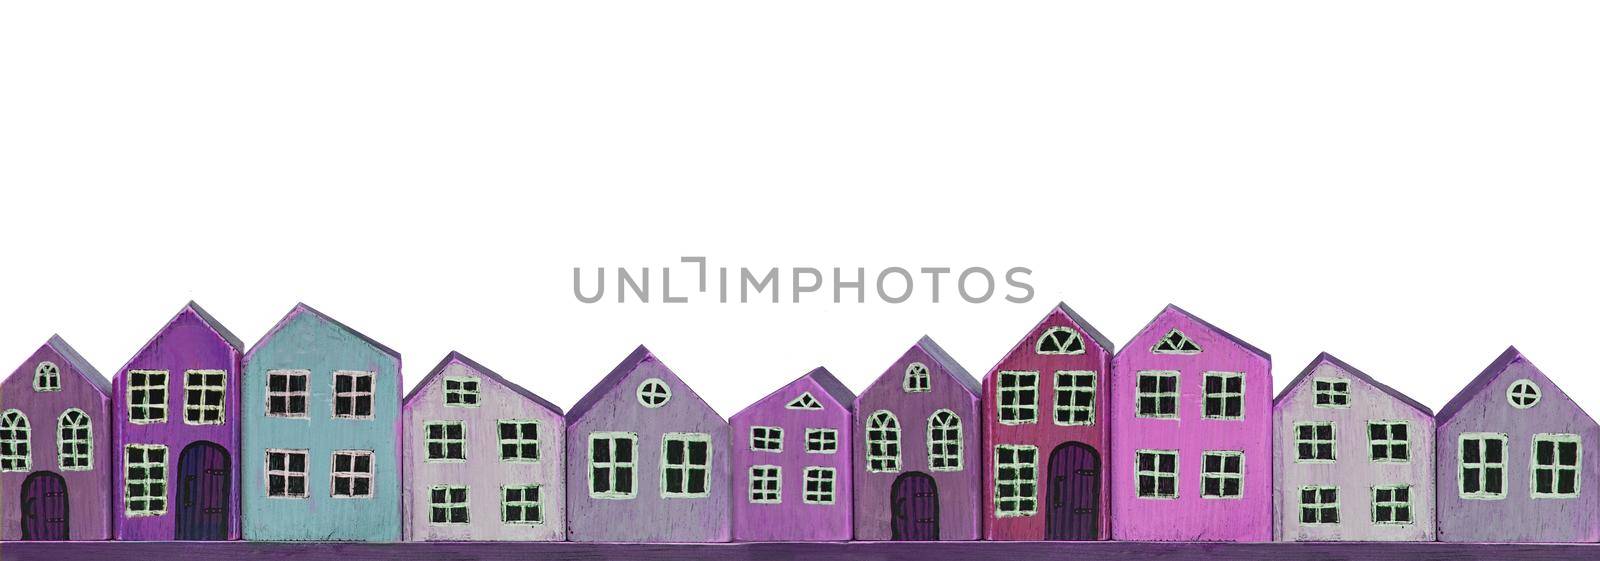 Wooden toy purple houses on a white background. Banner miniature town. by Sviatlana